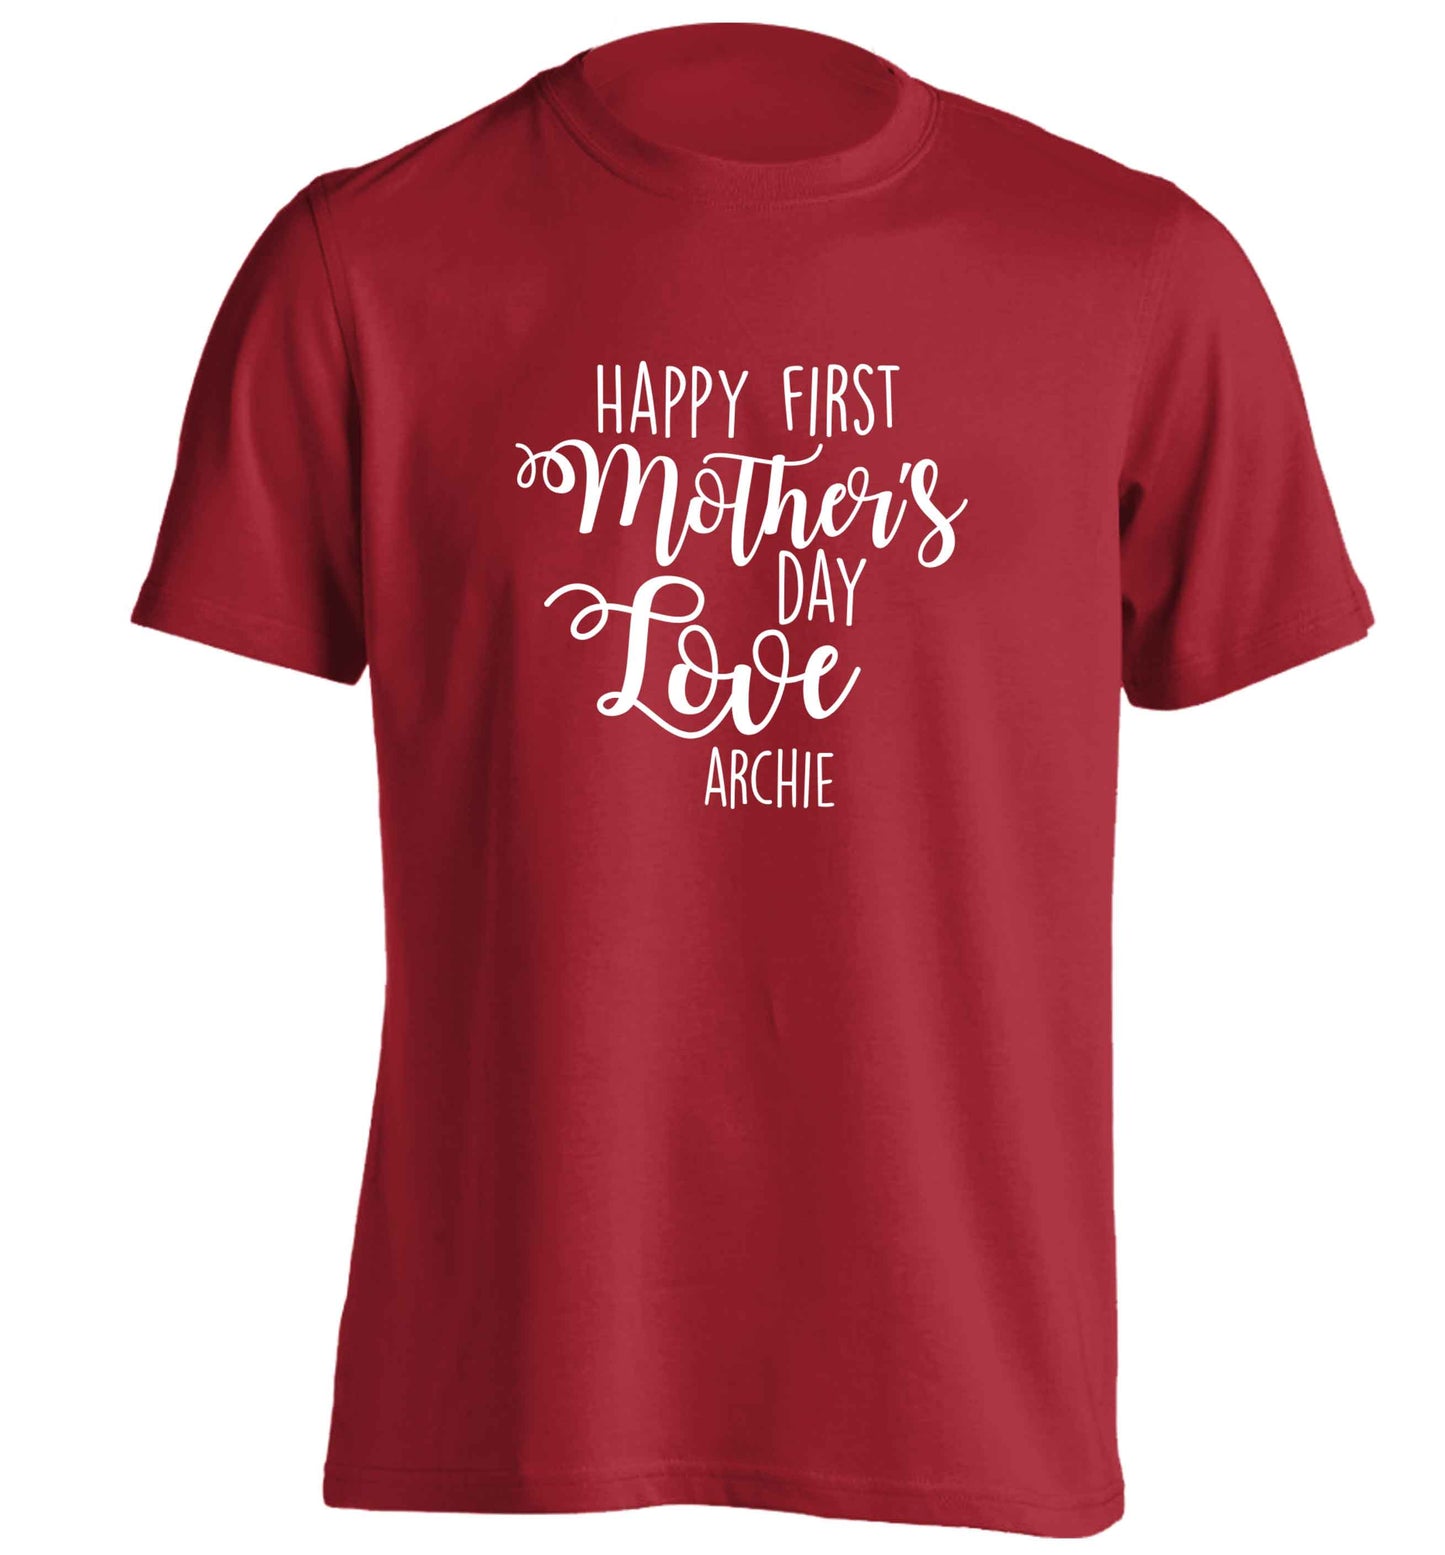 Personalised happy first mother's day love adults unisex red Tshirt 2XL